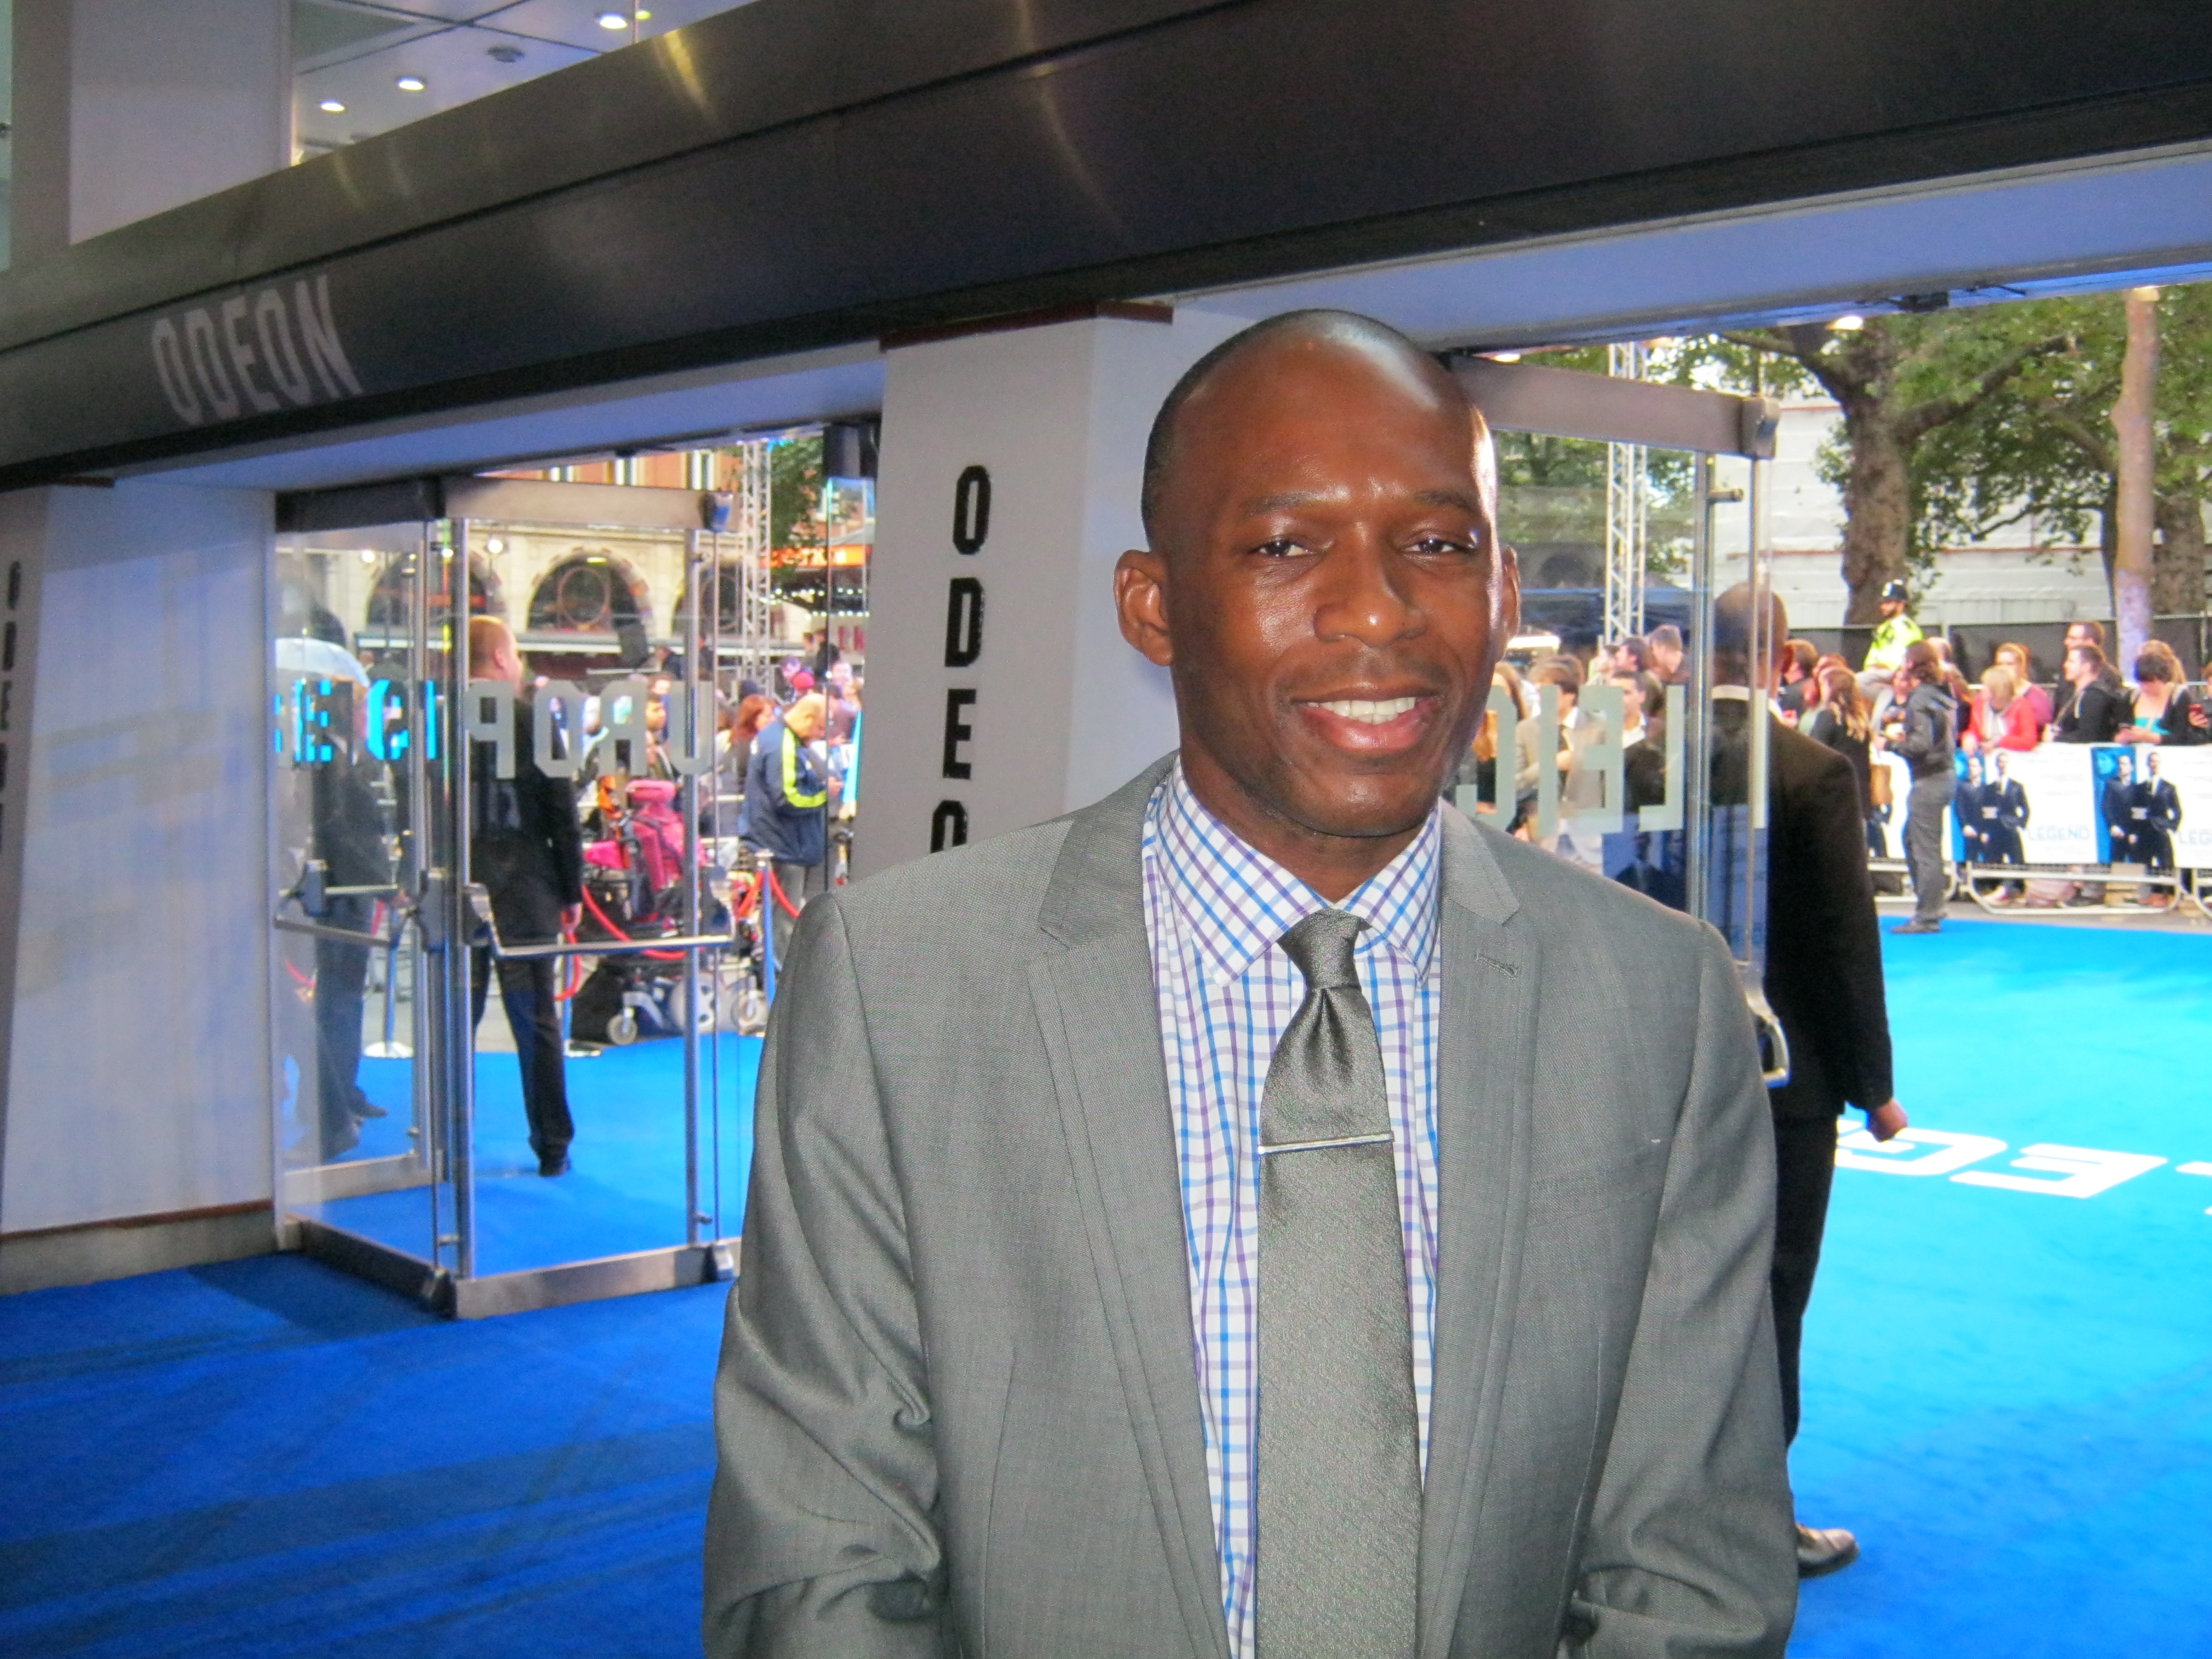 David Olawale Ayinde, Actor at Film Premiere of the Film The Legend, Odeon London Leicester Square